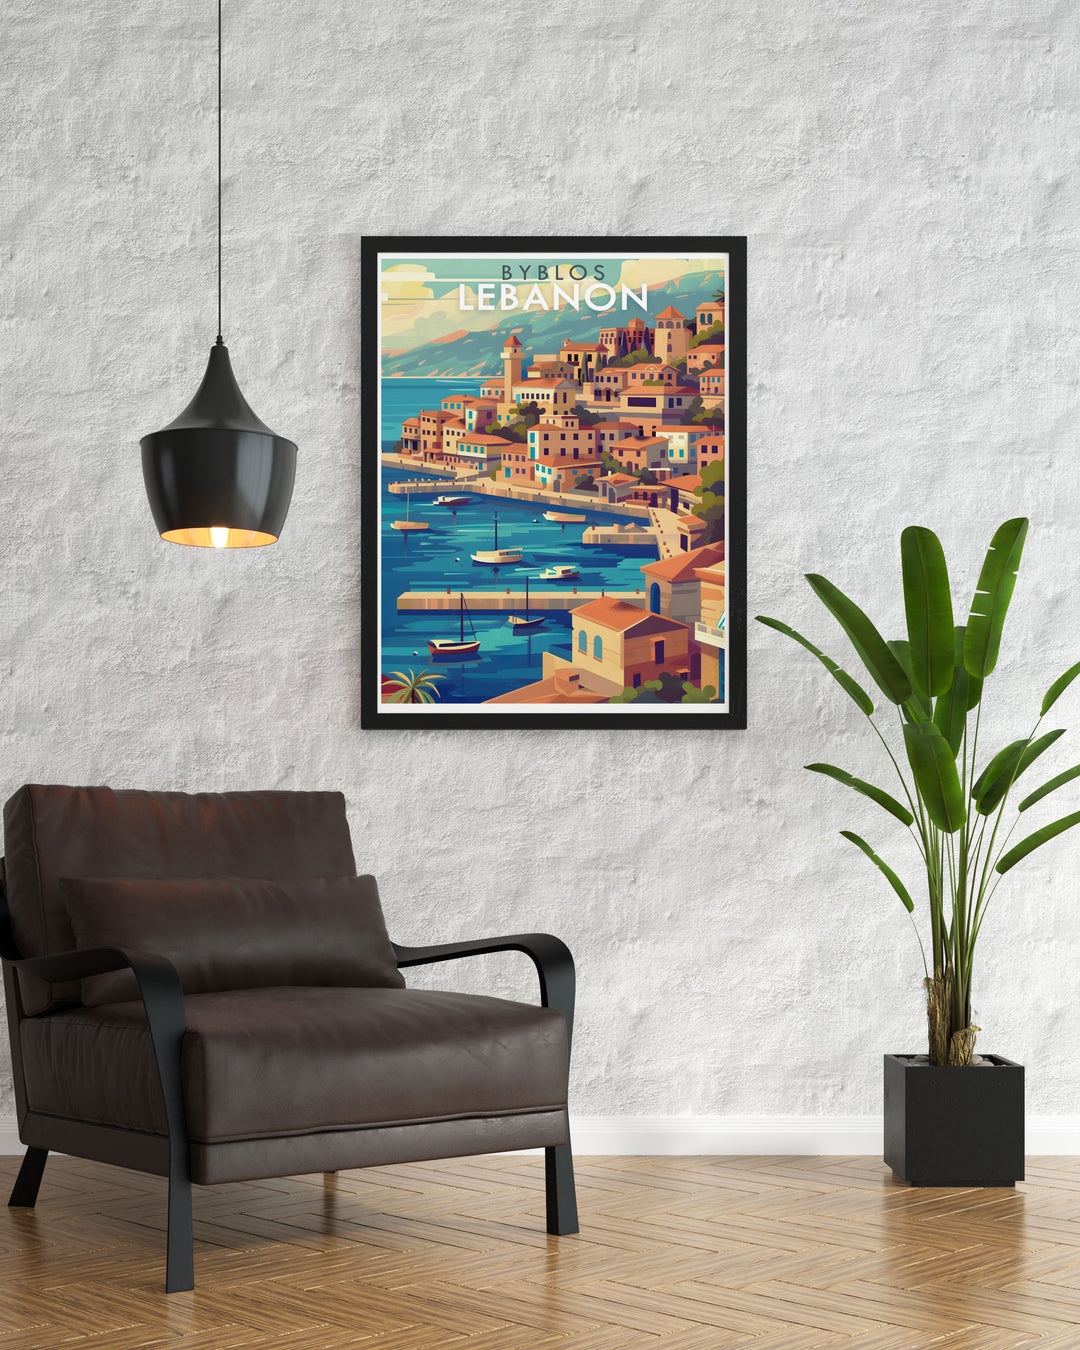 Beirut Photo highlighting the citys blend of modernity and tradition with Byblos travel poster offering a glimpse into the ancient citys captivating past making thoughtful gifts for any occasion